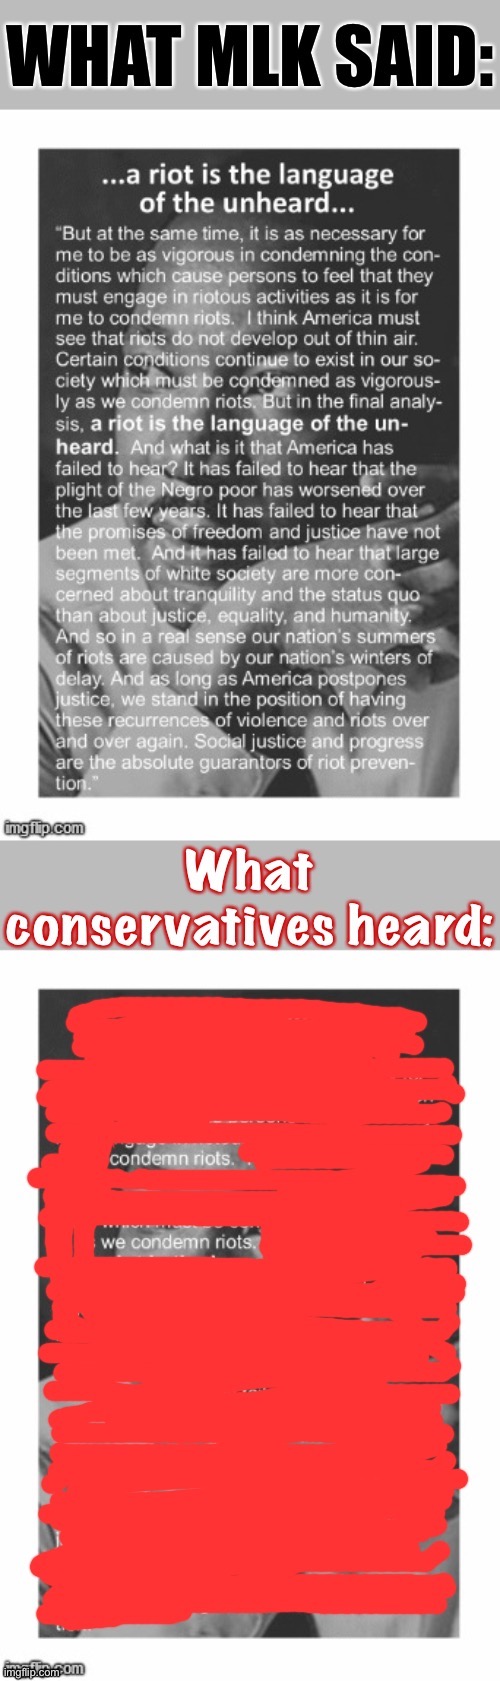 Funny how that works | image tagged in mlk quote riots conservative logic | made w/ Imgflip meme maker